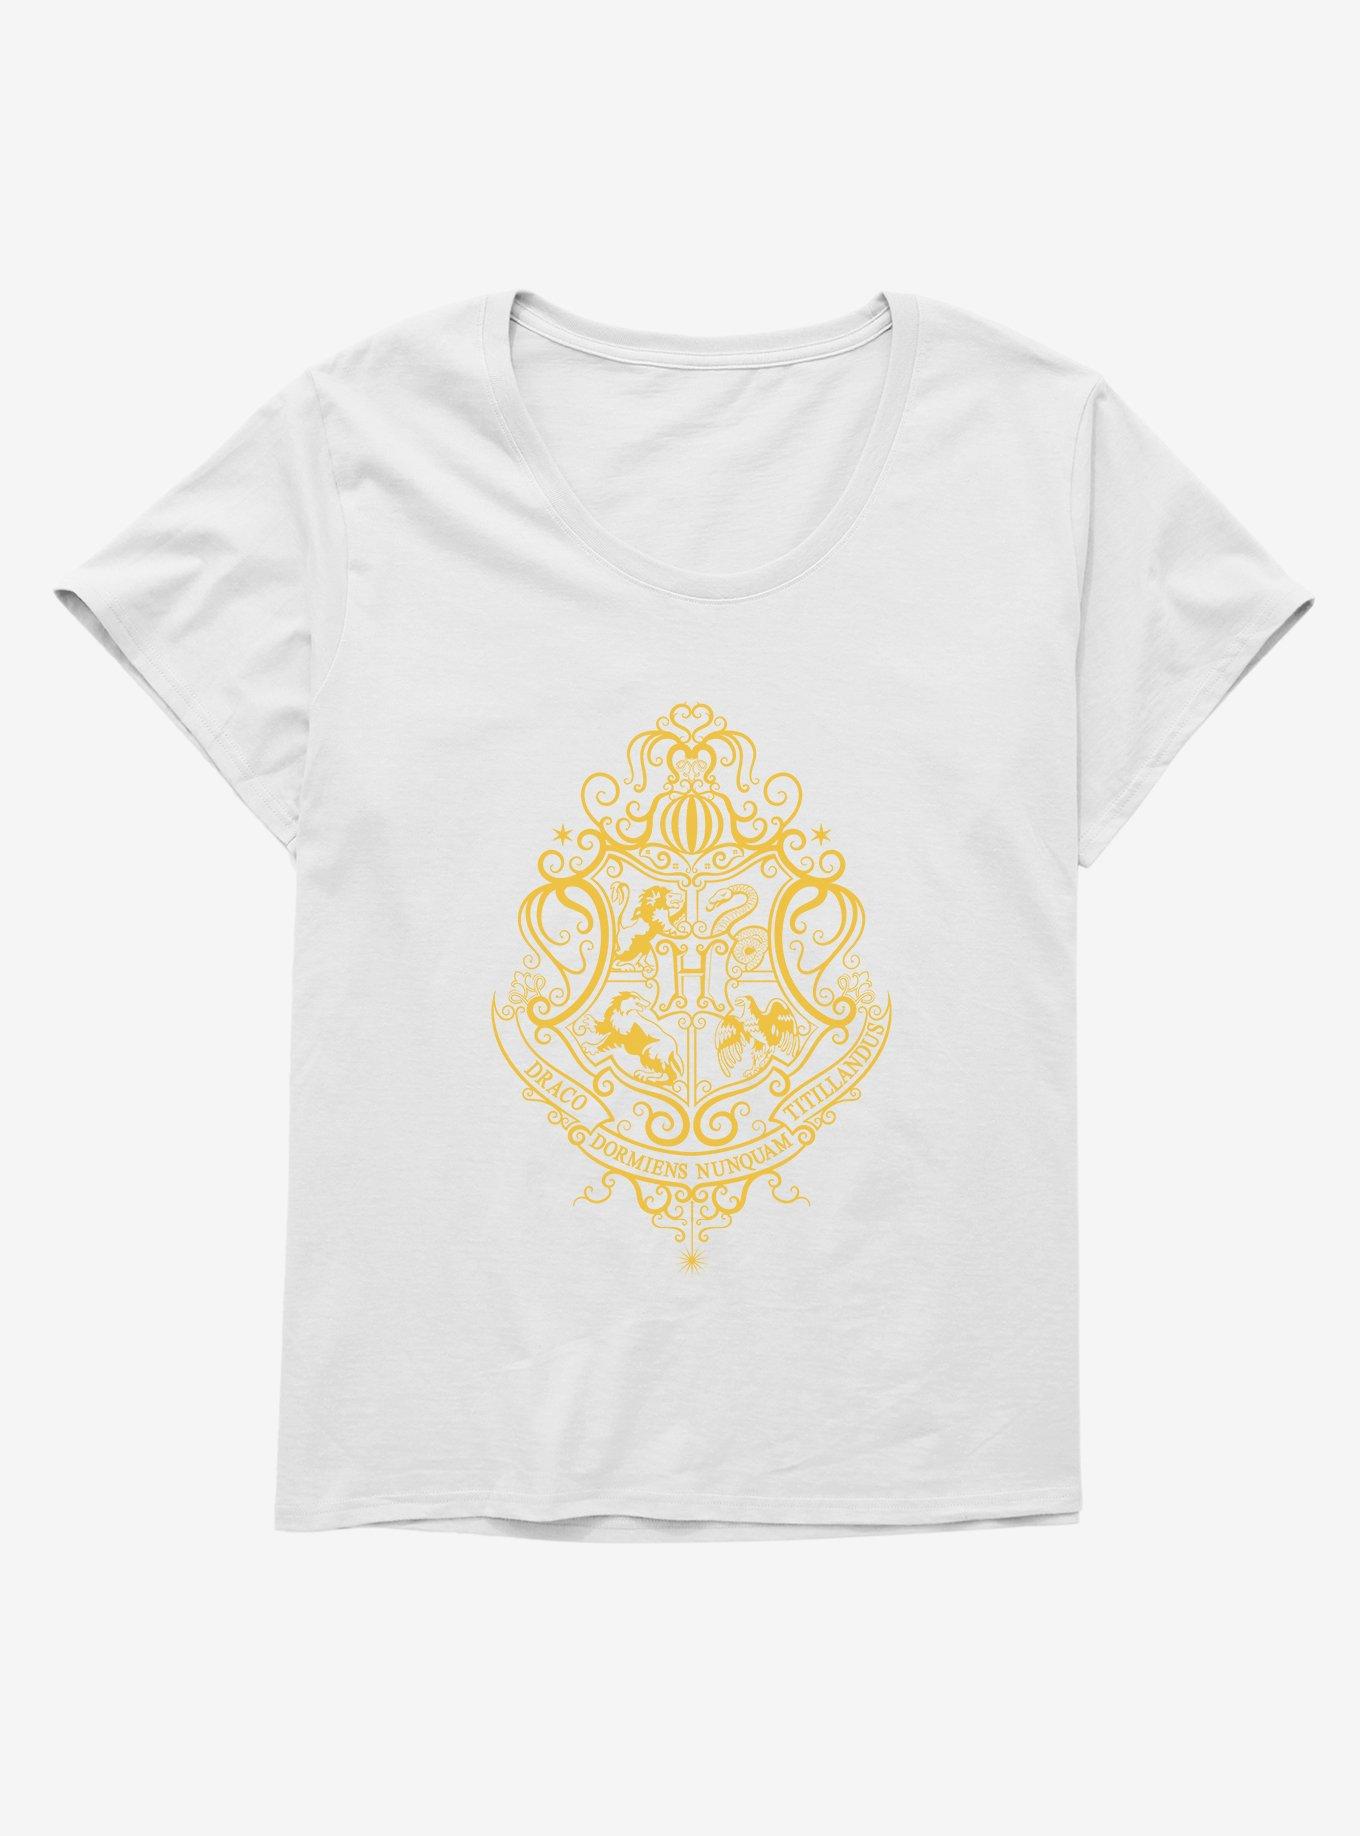 Harry Potter Hogwarts Crest Abstract Girls T-Shirt Plus Size, WHITE, hi-res